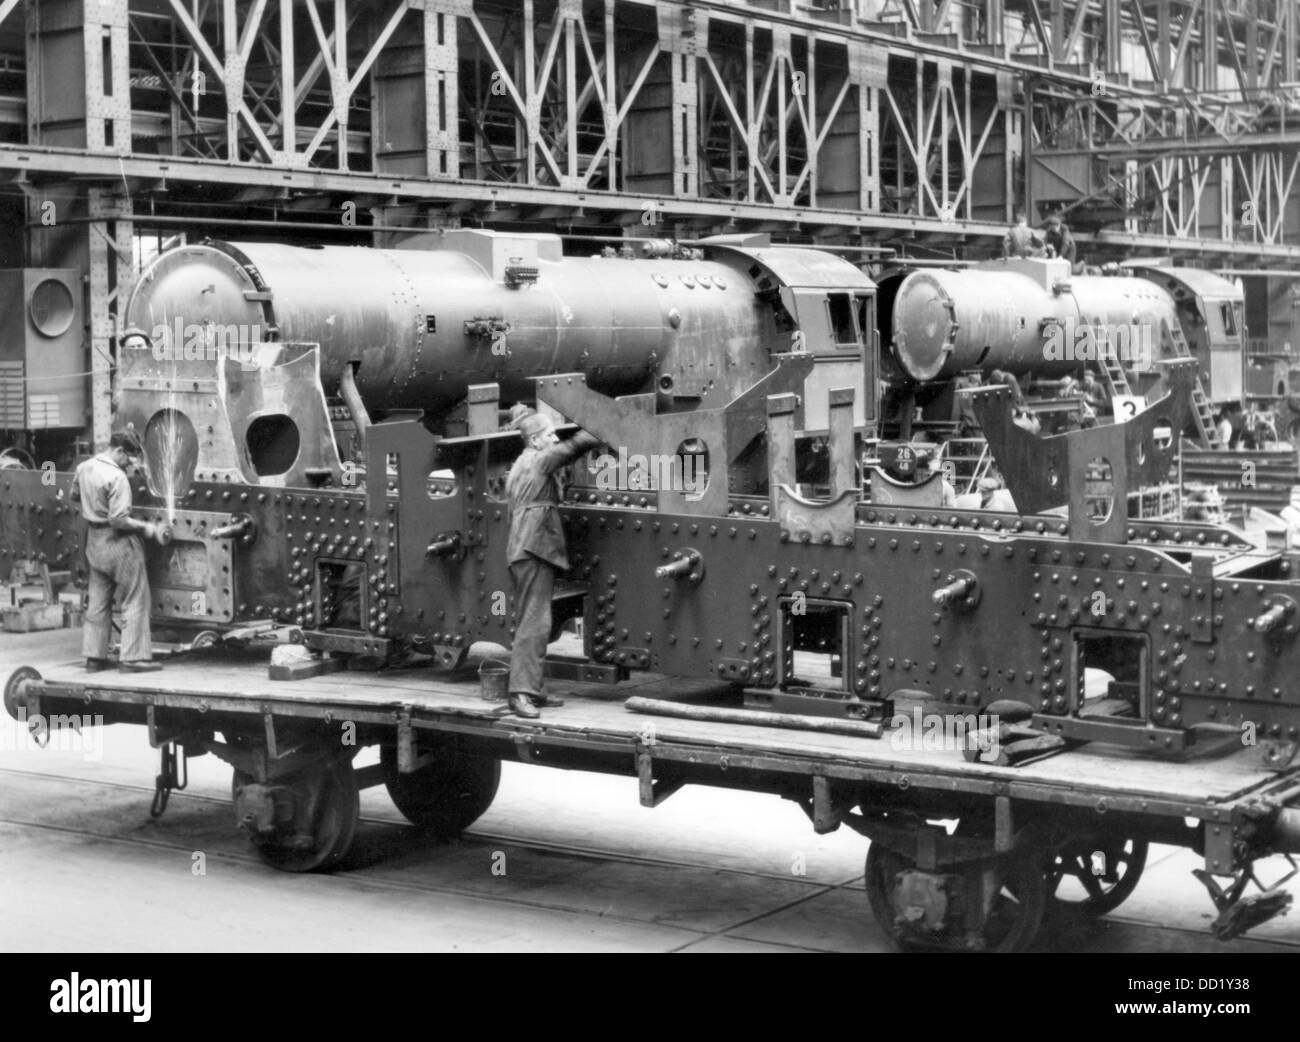 View of the production of a war locomotive series 52 at the Berliner Maschinenbau AG in Wildau, Germany, in August 1943. The construction of a locomotive well-suited for the employment in war should ensure adequate supplying of the territories in the East occupied by the German Wehrmacht. Photo: Bildarchiv der Eisenbahnstiftung/RVM (minimum fee 60 euros) Stock Photo